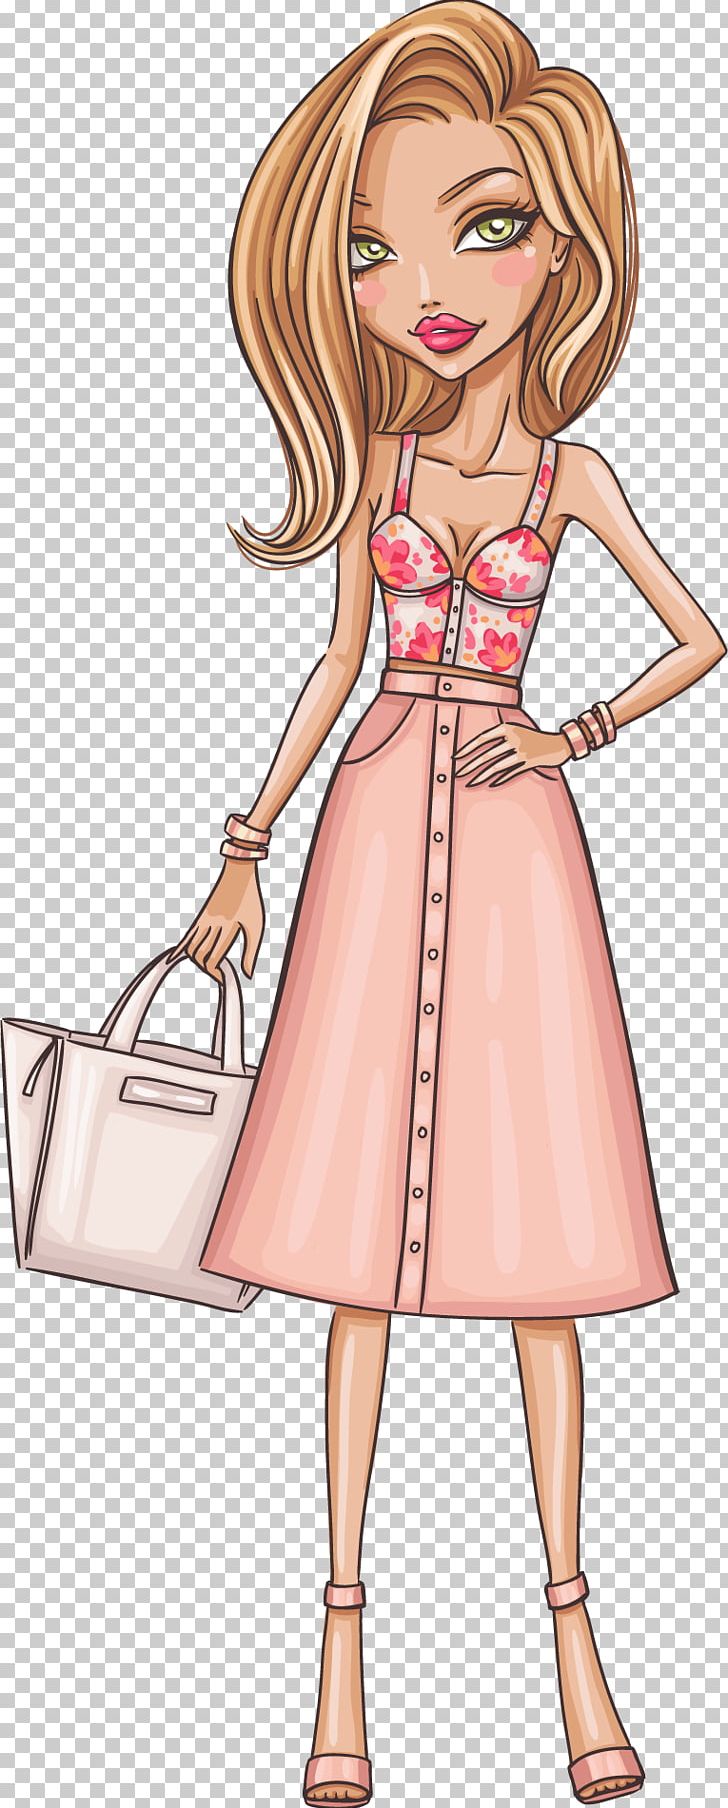 Stock Photography Fashion Drawing Illustration PNG, Clipart, Brown Hair, Cartoon, Creative Market, Doll, Fashion Design Free PNG Download